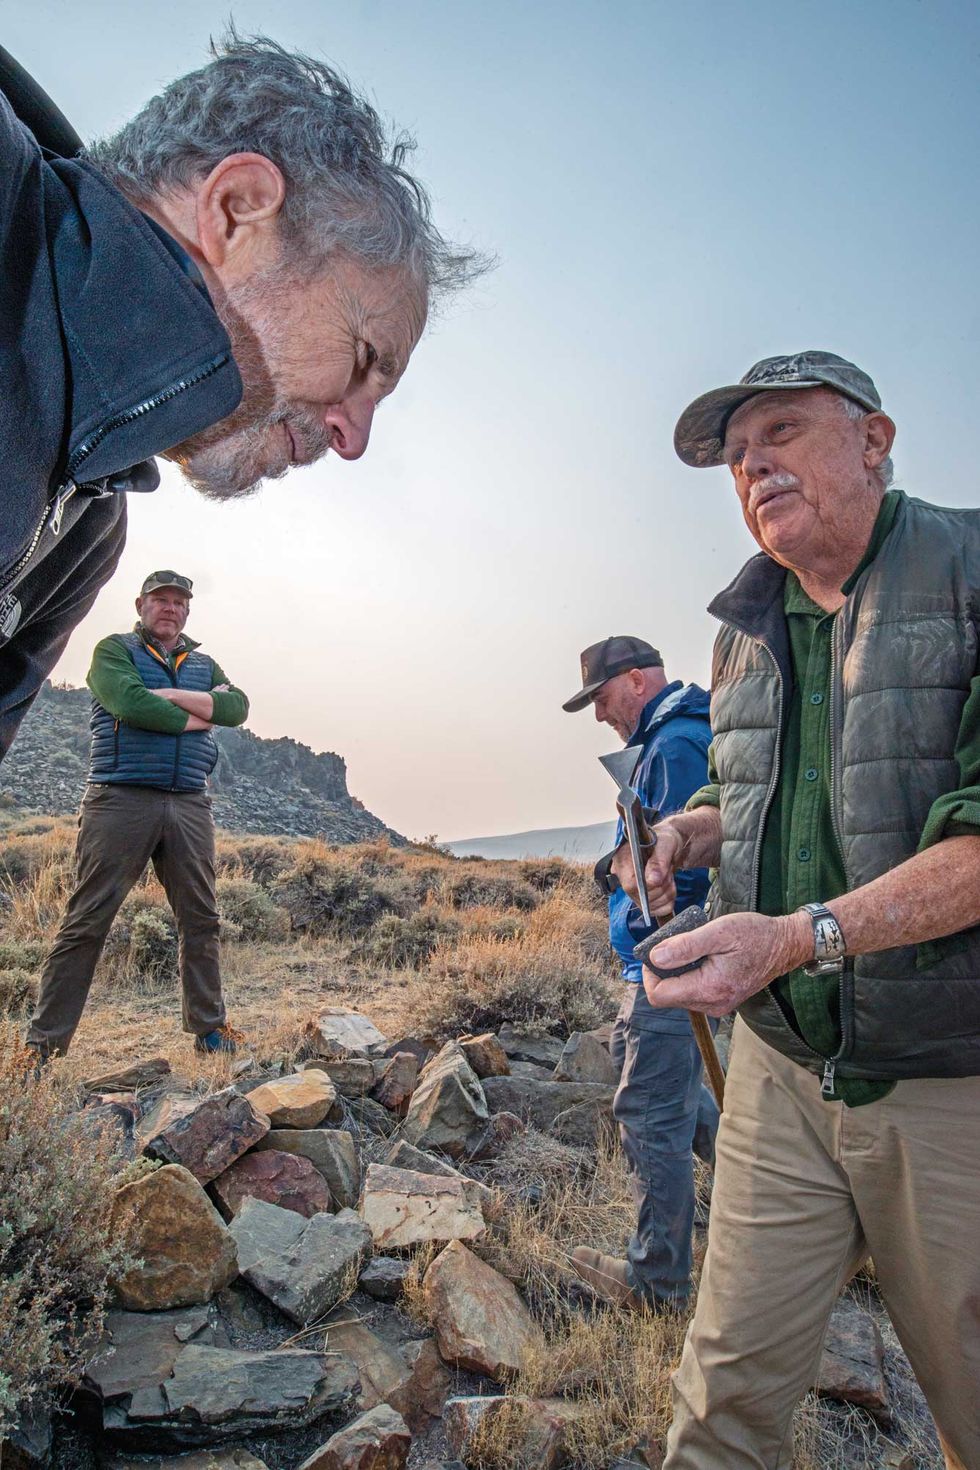 robert bettinger explains how to distinguish early native american artifacts to author robert roper as archaeologists loukas barton and micah hale listen in